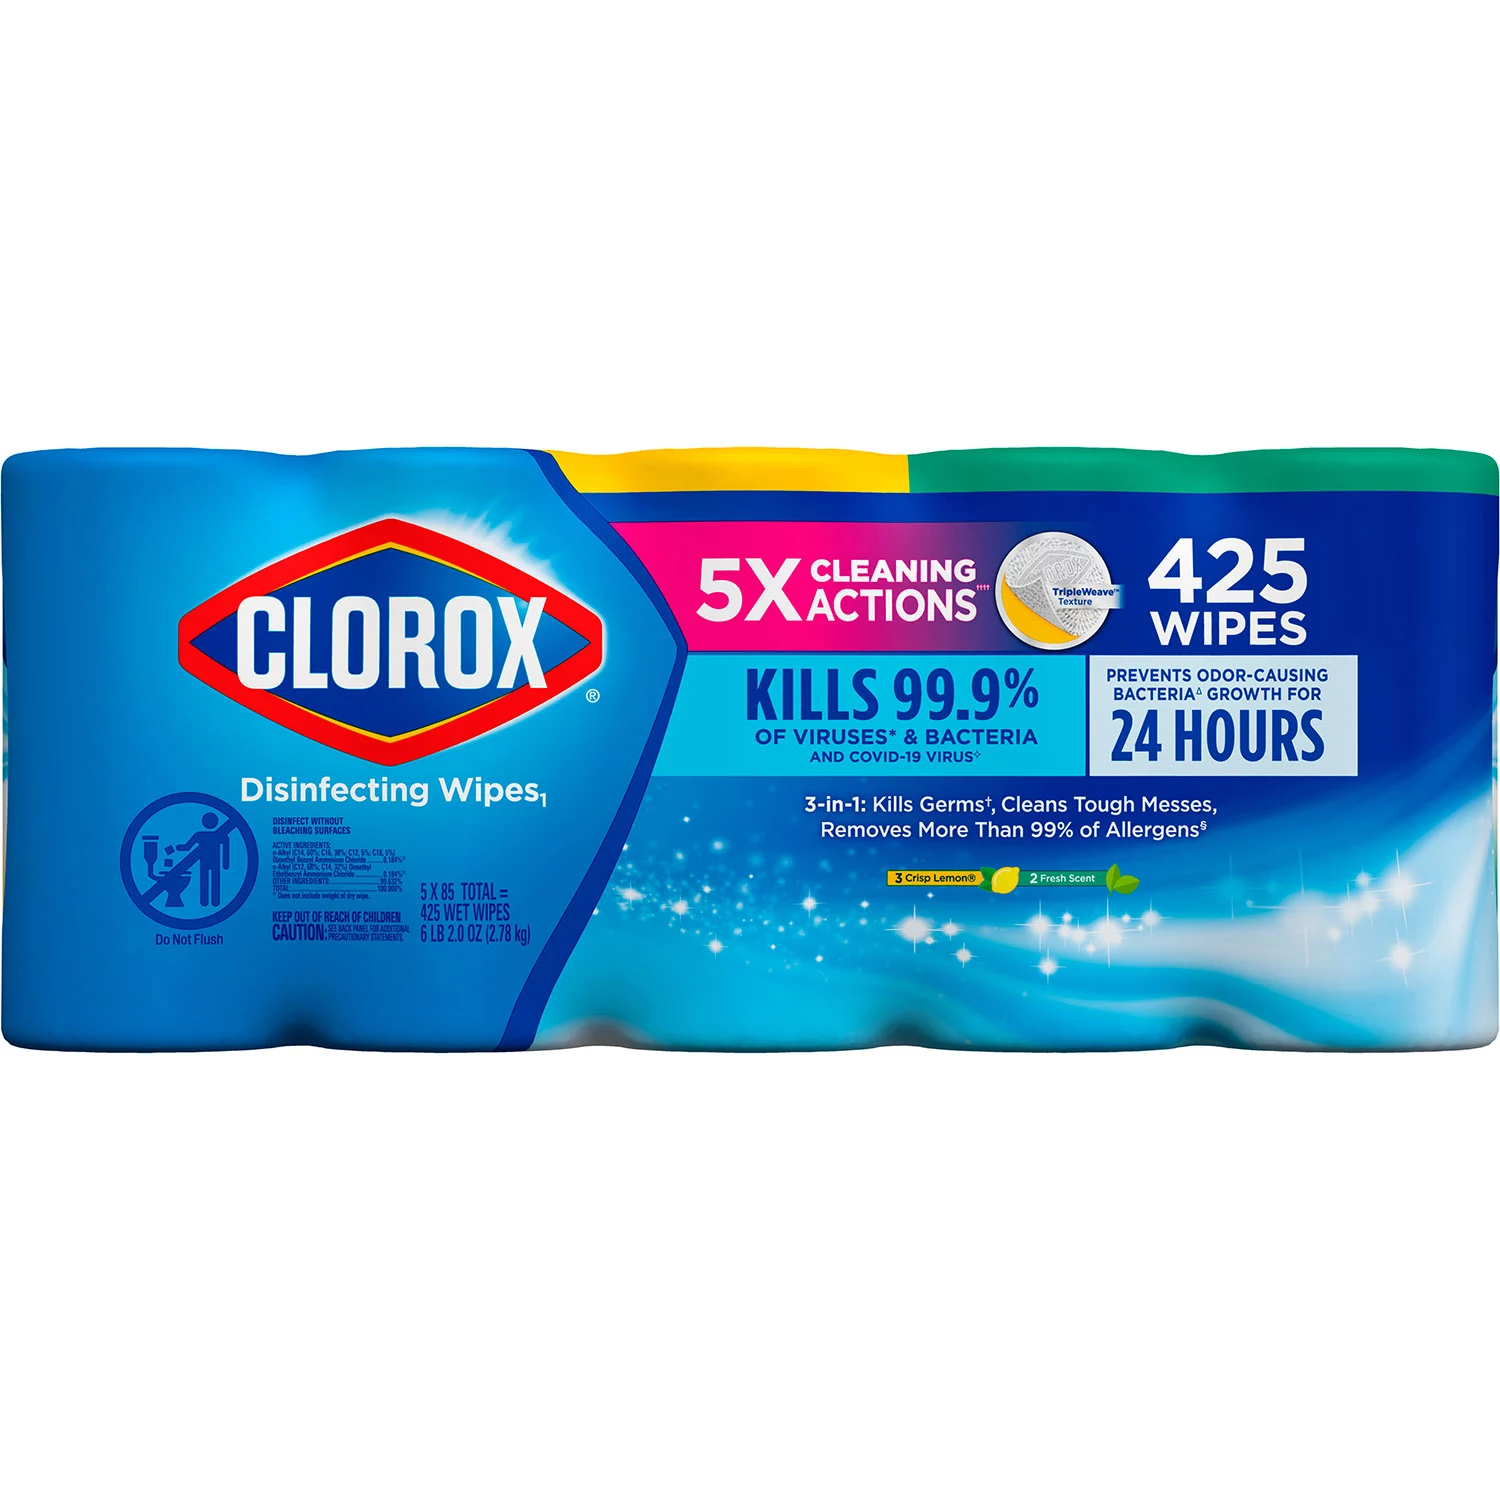 Clorox Disinfecting Wipes Value Pack Cleaning Wipes Bleach Free 85 Count Each Pack of 5